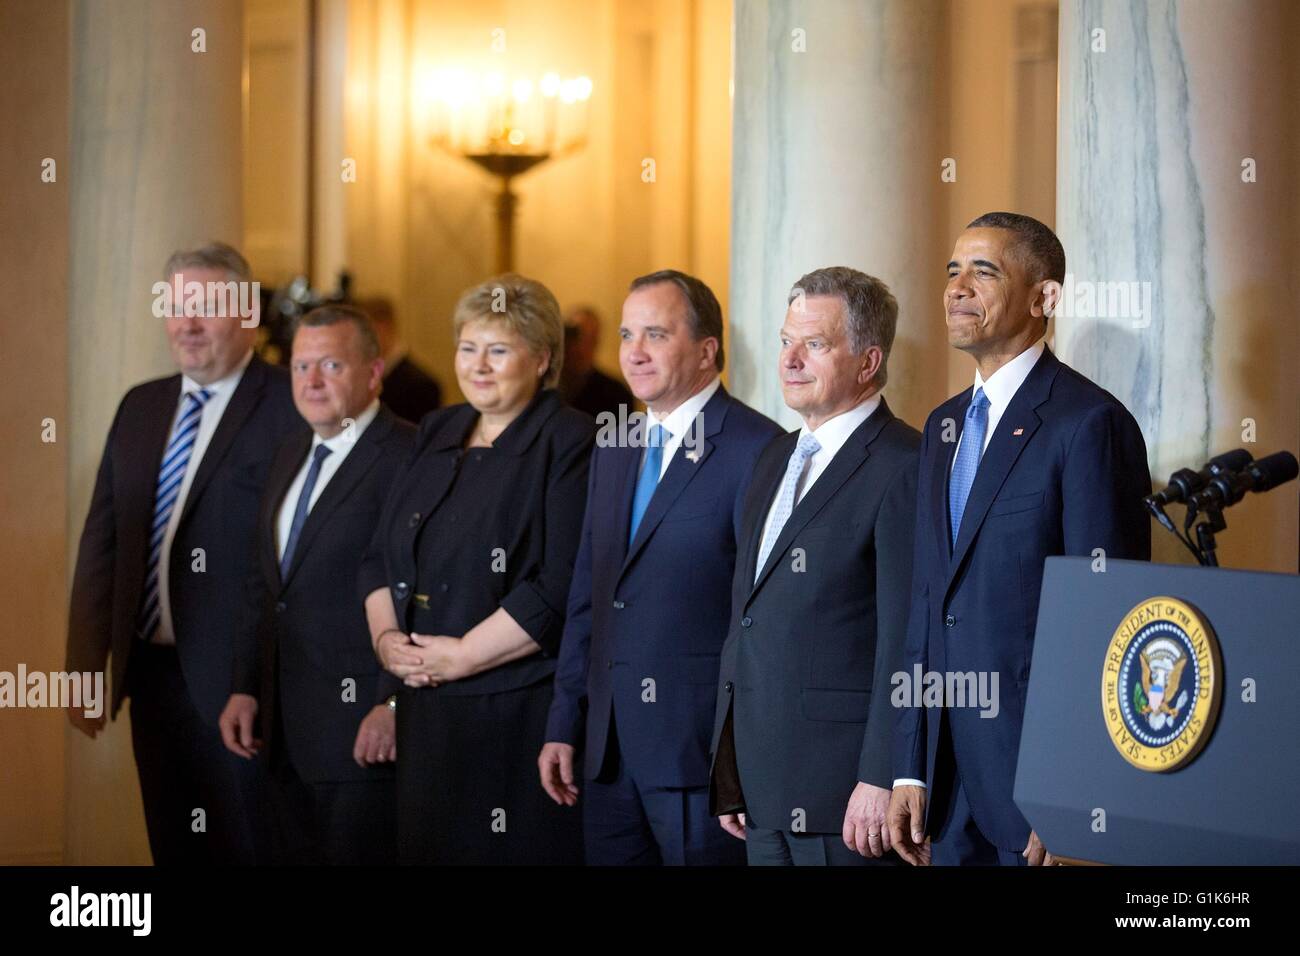 U.S President Barack Obama stands with the Nordic leaders during the arrival ceremony in the Grand Foyer of the White House May 13, 2016 in Washington, DC. From left are Prime Minister Sigurdur Ingi Johannsson of Iceland, Prime Minister Lars Lokke Rasmussen of Denmark, Prime Minister Erna Solberg of Norway, Prime Minister Stefan Lofven of Sweden, and President Sauli Niinisto of Finland. Stock Photo